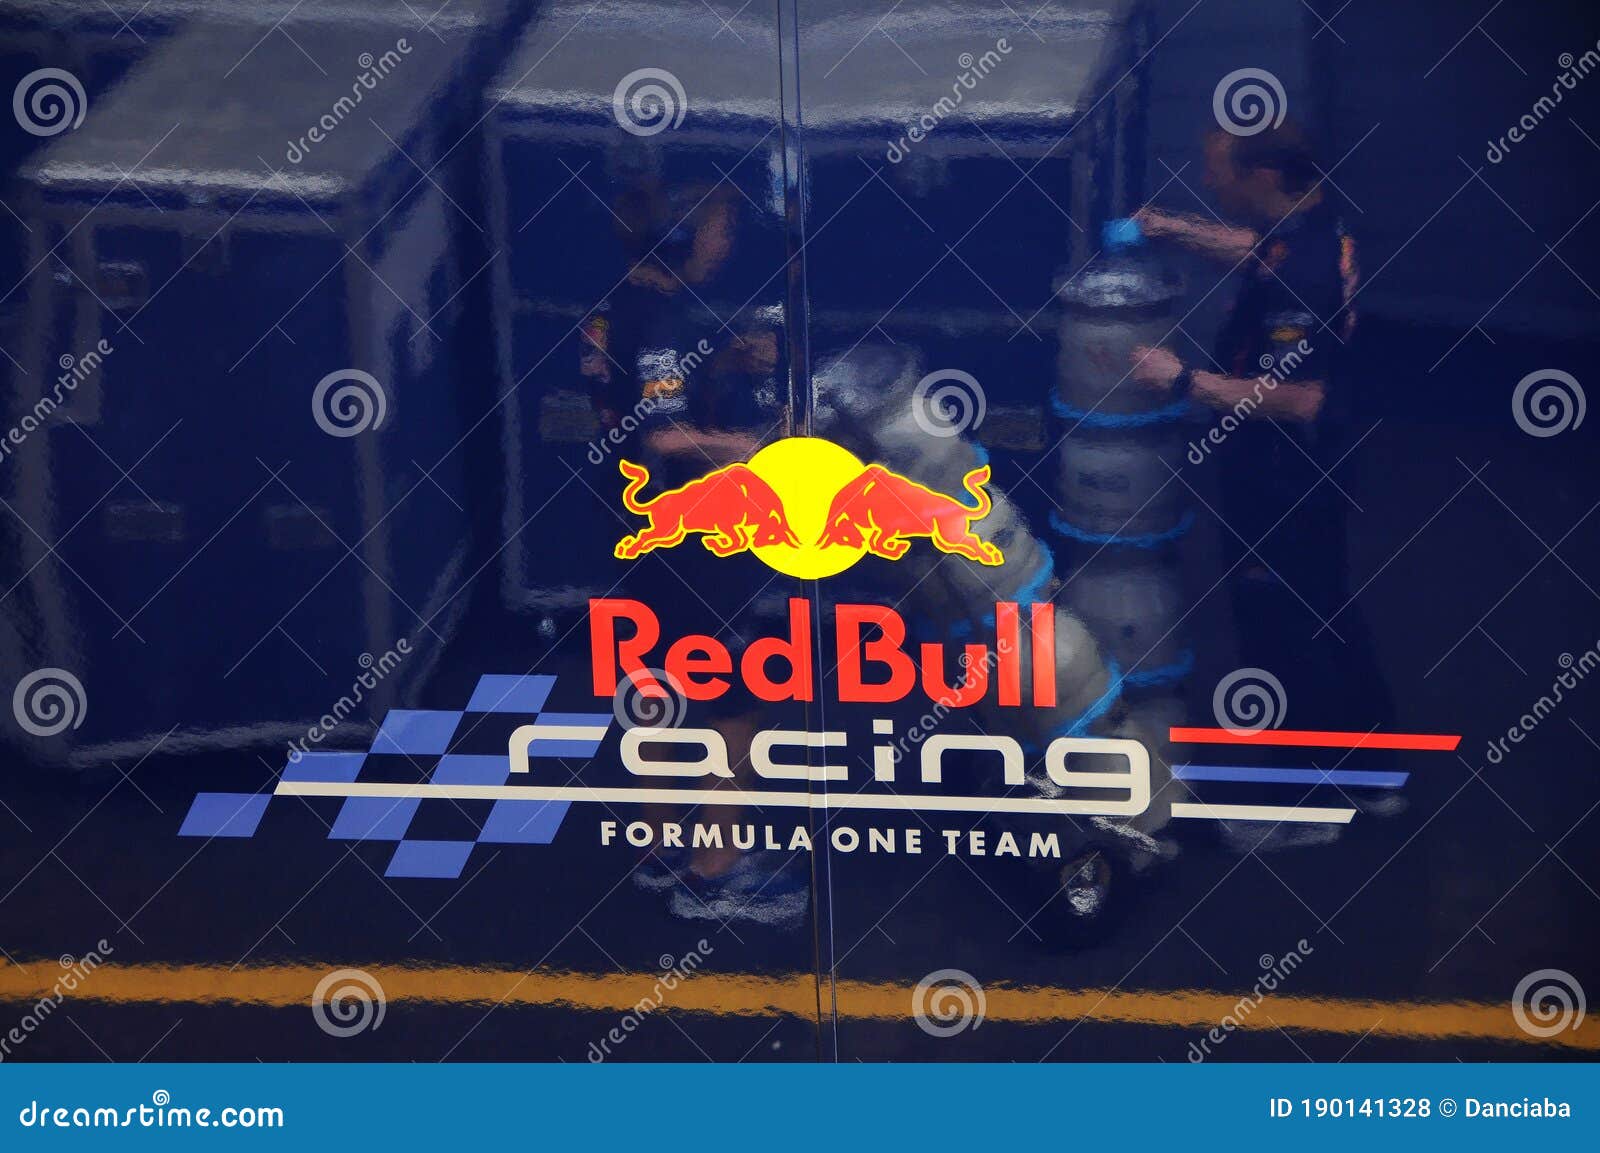 428 Racing Team Logo Photos Free Royalty Free Stock Photos From Dreamstime